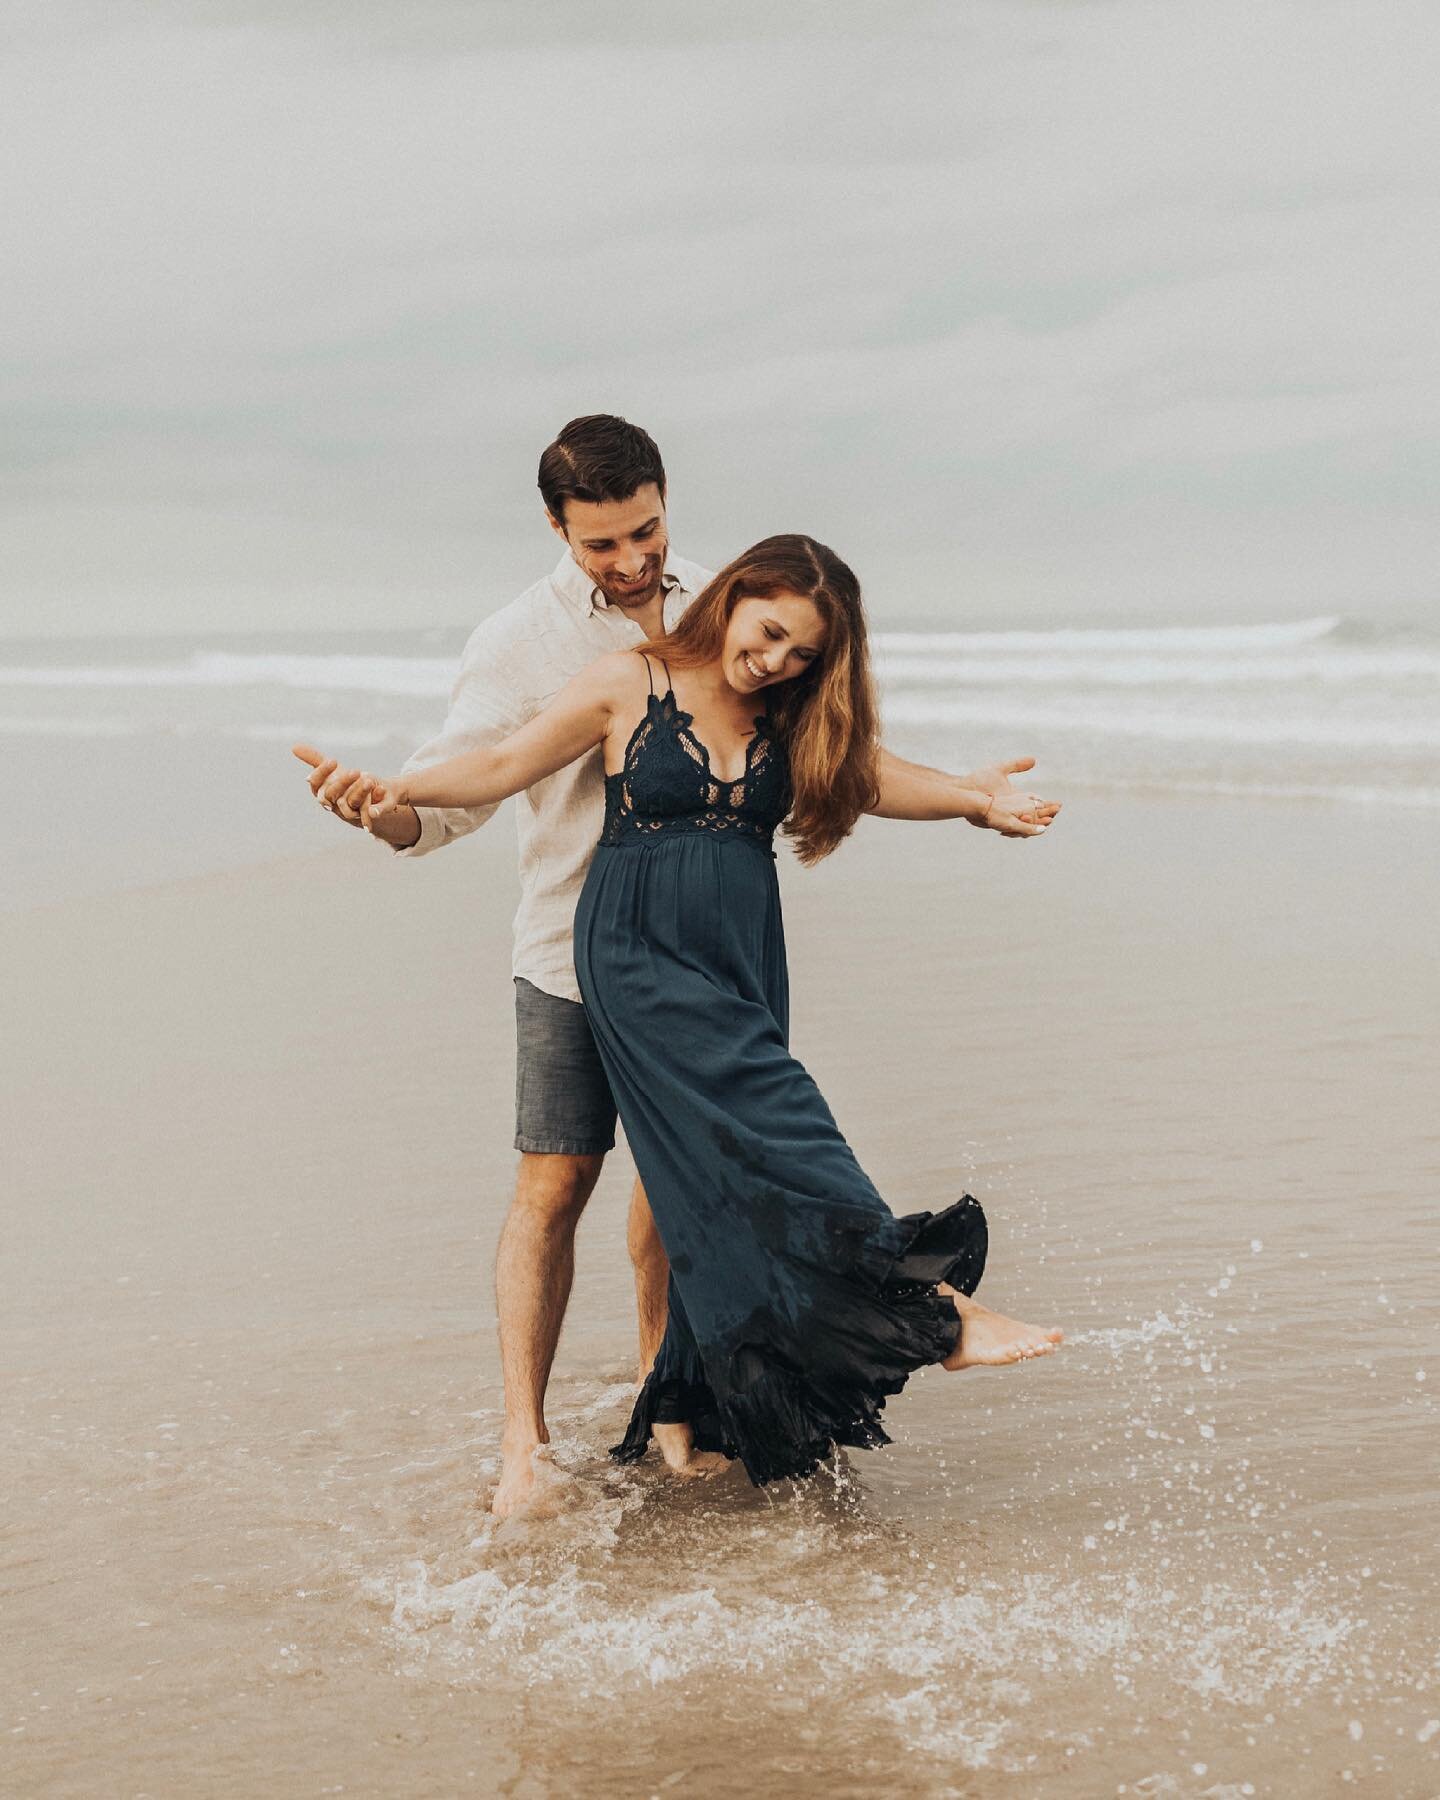 These two drove all the way from NY for a little getaway + session with me, and I&rsquo;m so glad they did! We dodged the rain and made the best of the weather. Overcast beach sessions are always some of my favorite 

&bull;

Now the question is, w